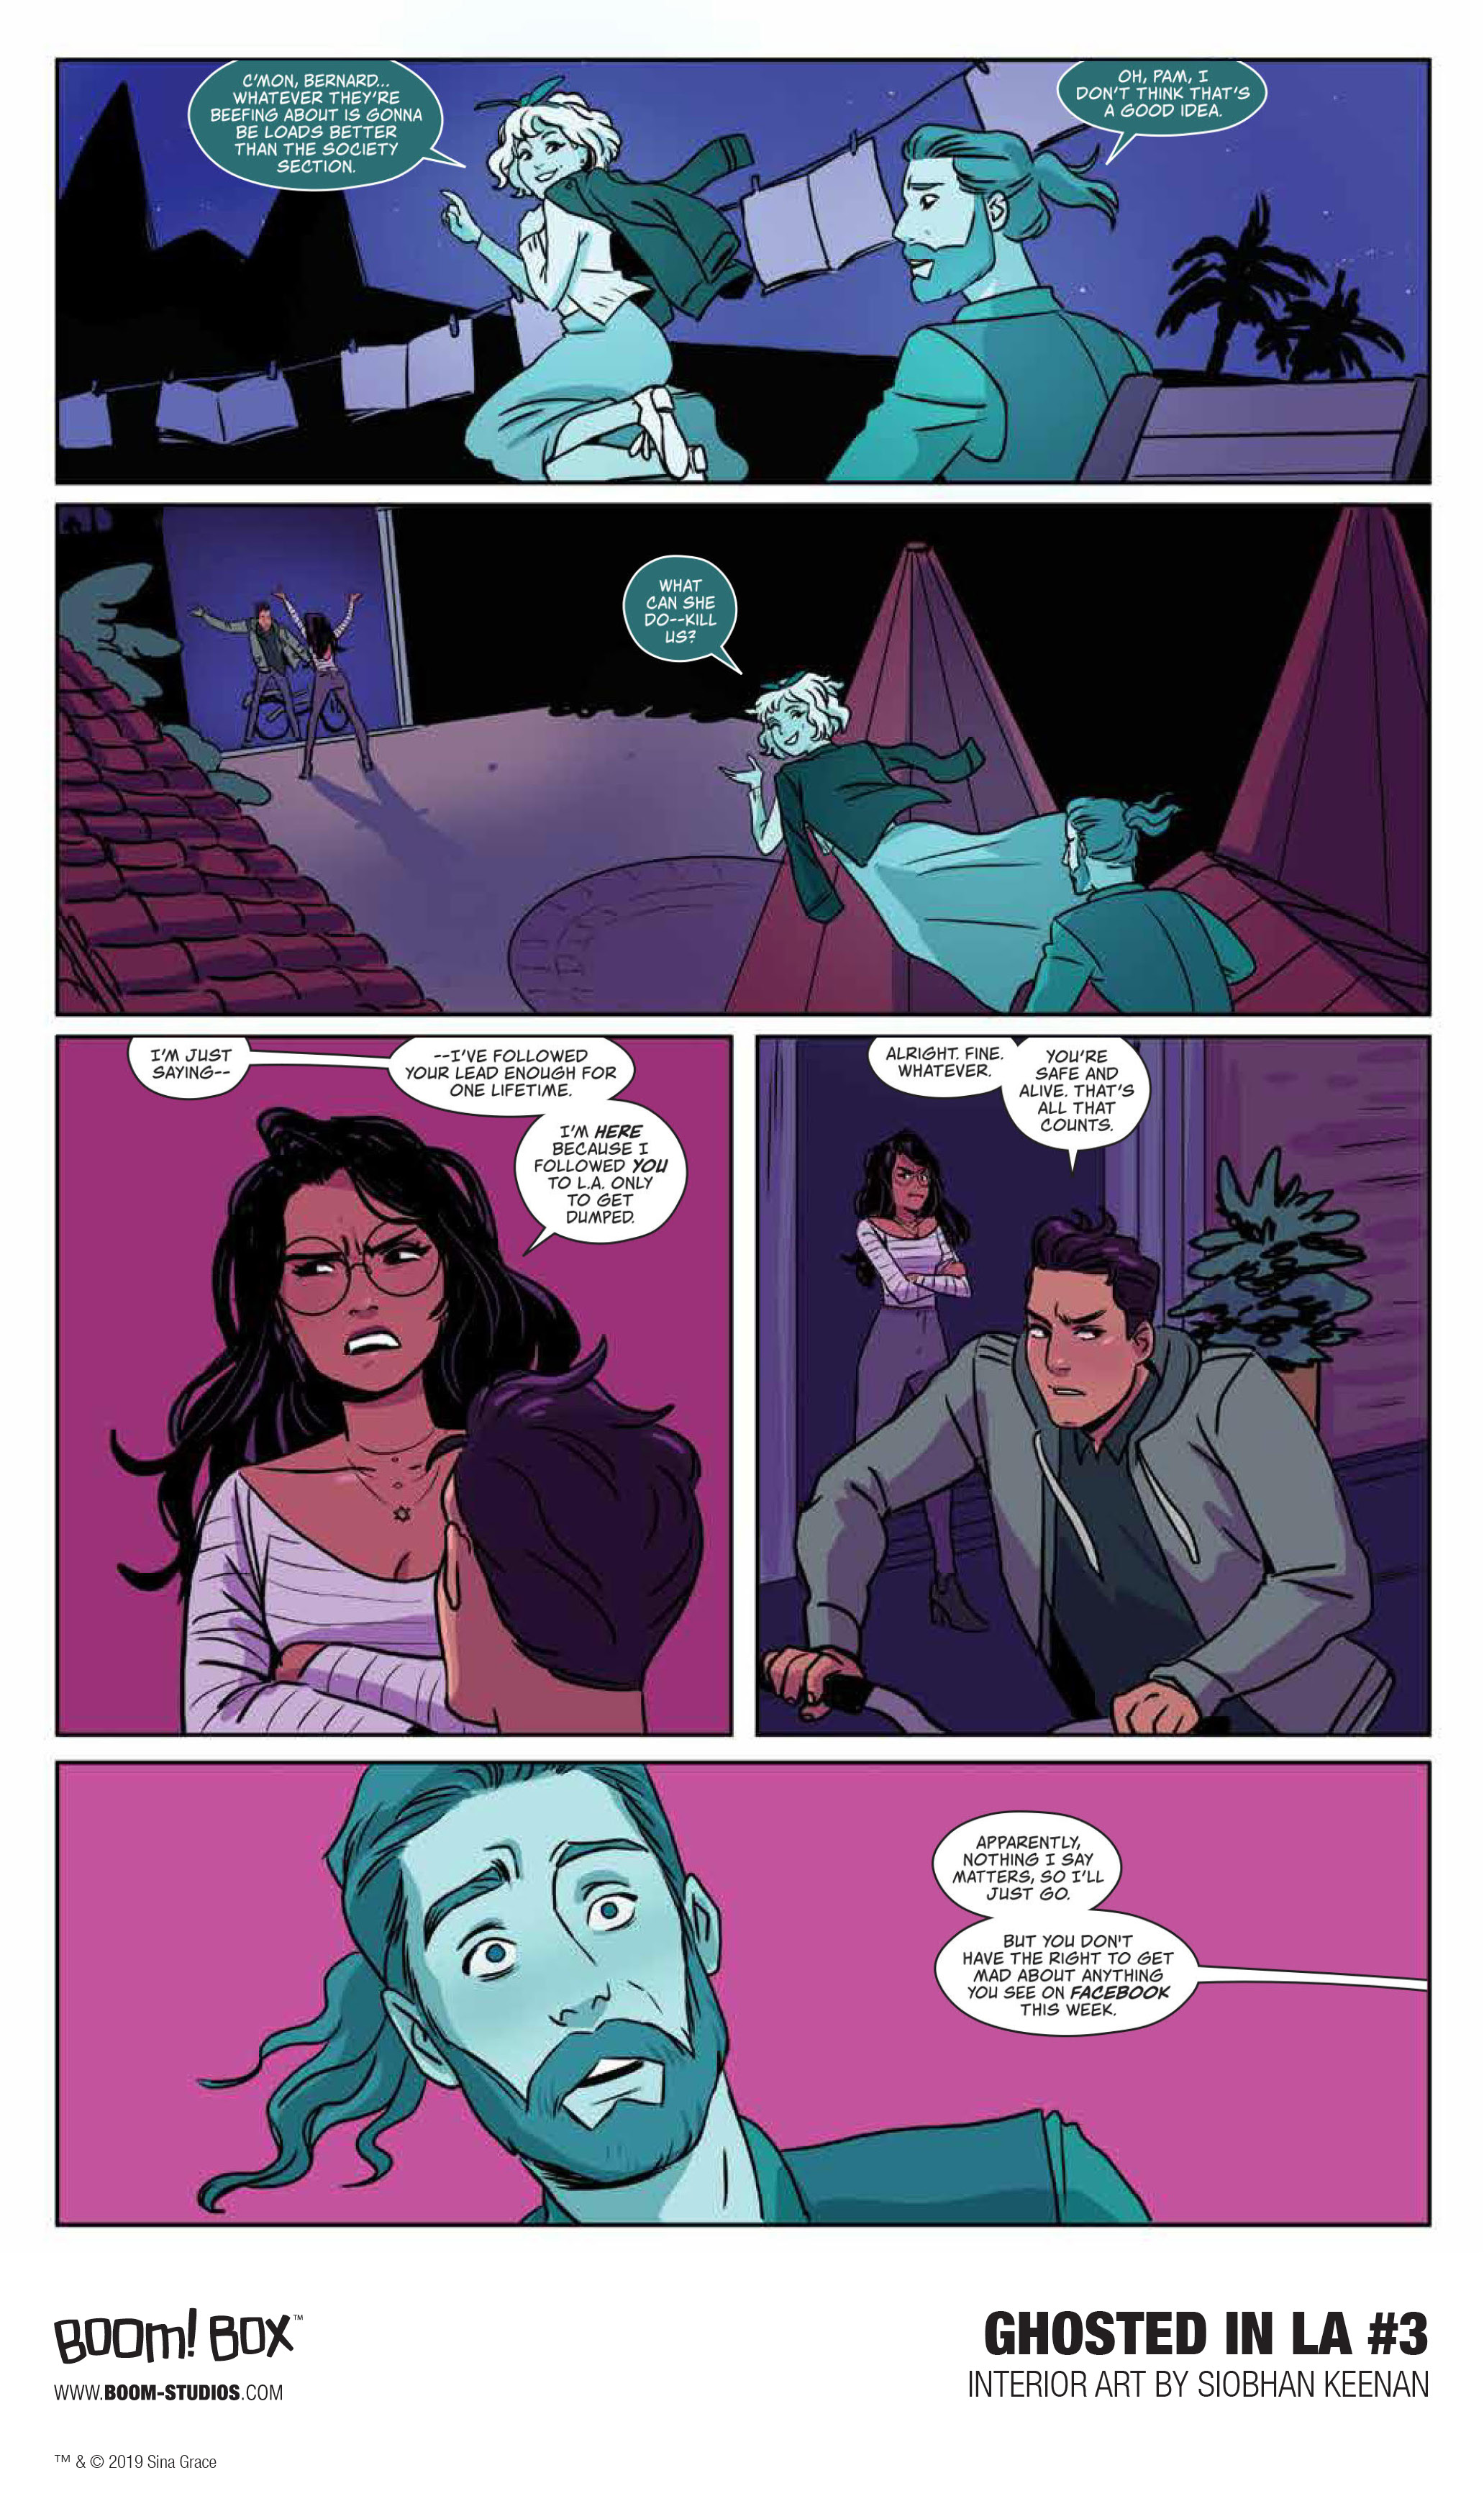 Ghosted in L.A. #3 preview page 3